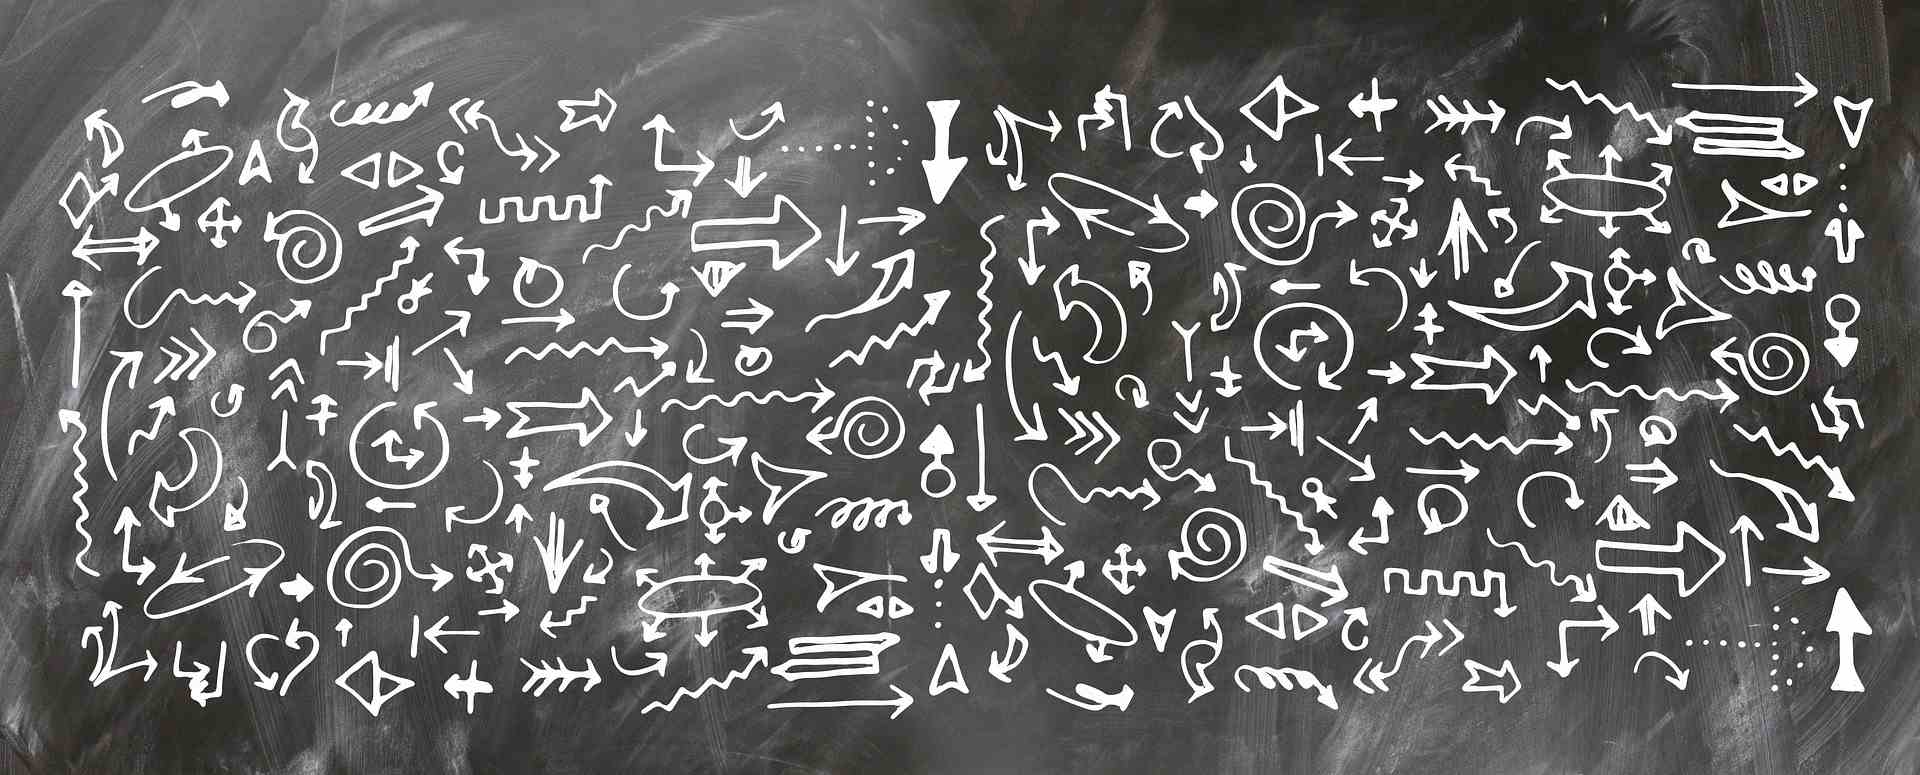 Various arrows drawn on a chalkboard